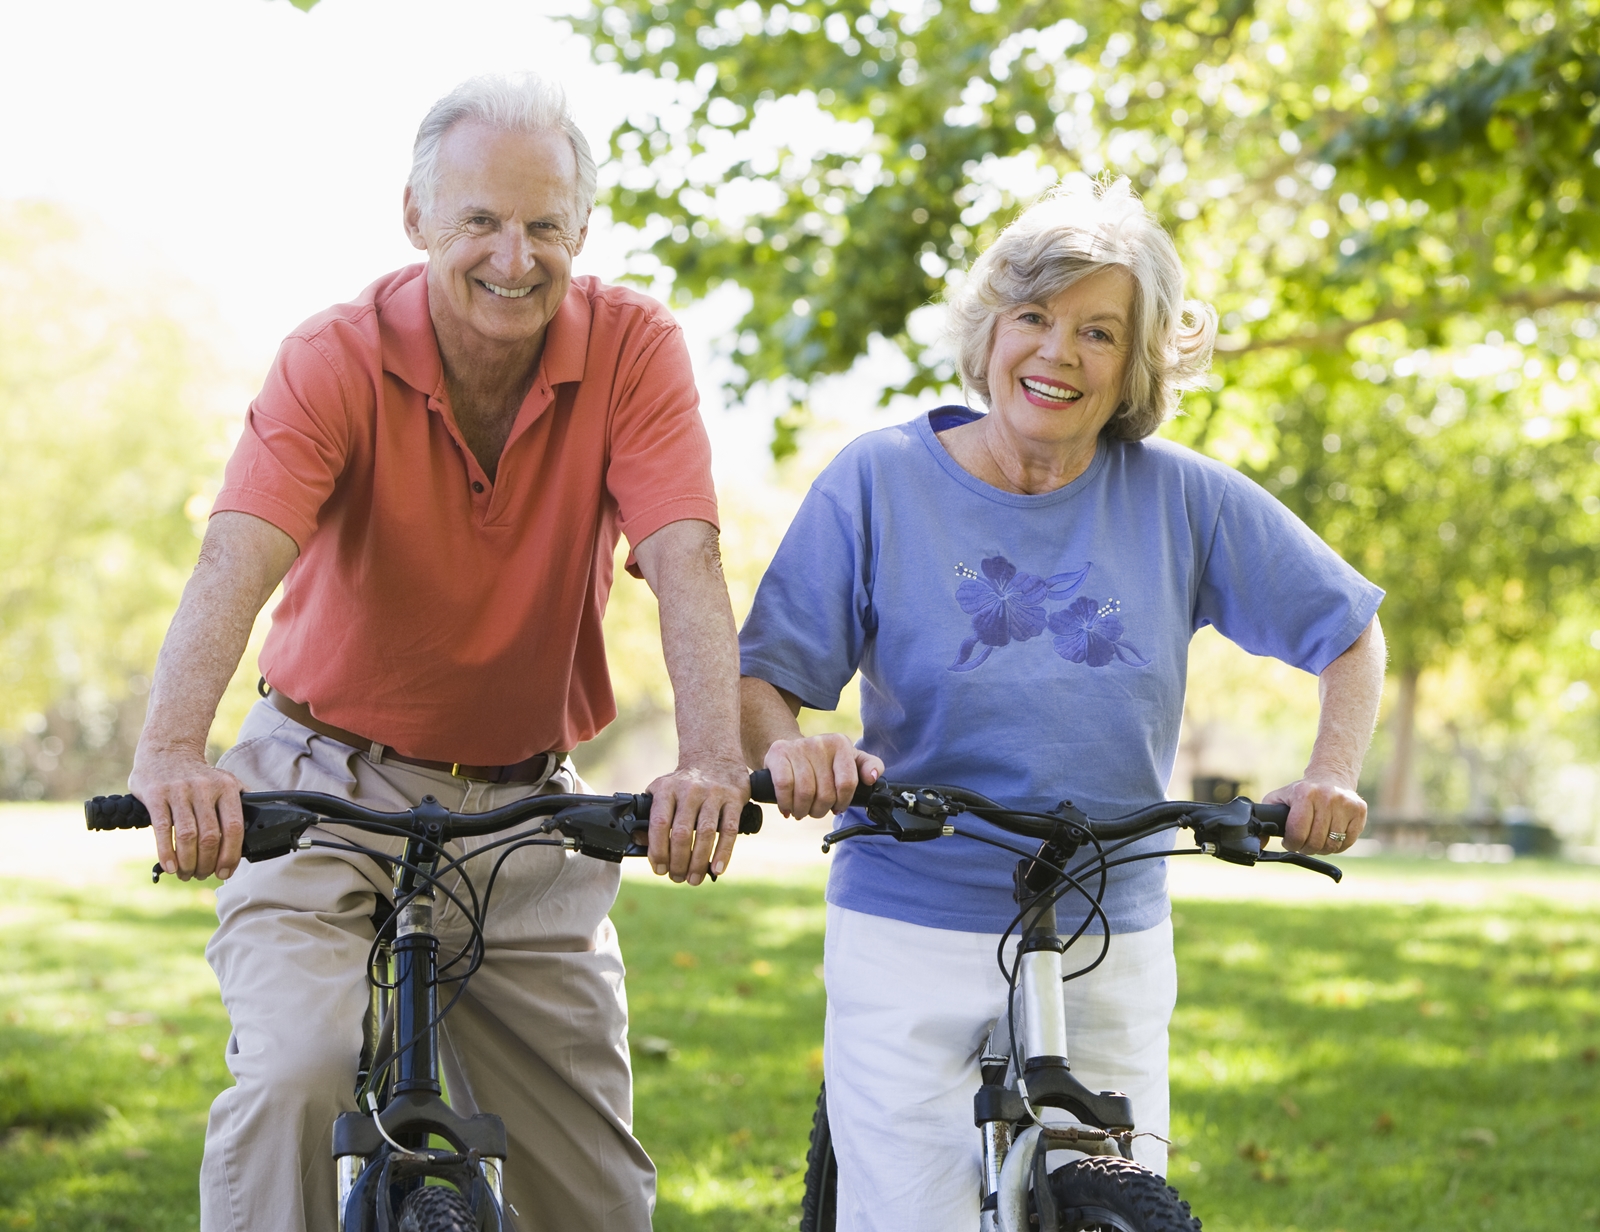 How to Improve Your Mental and Physical Health Post-Retirement